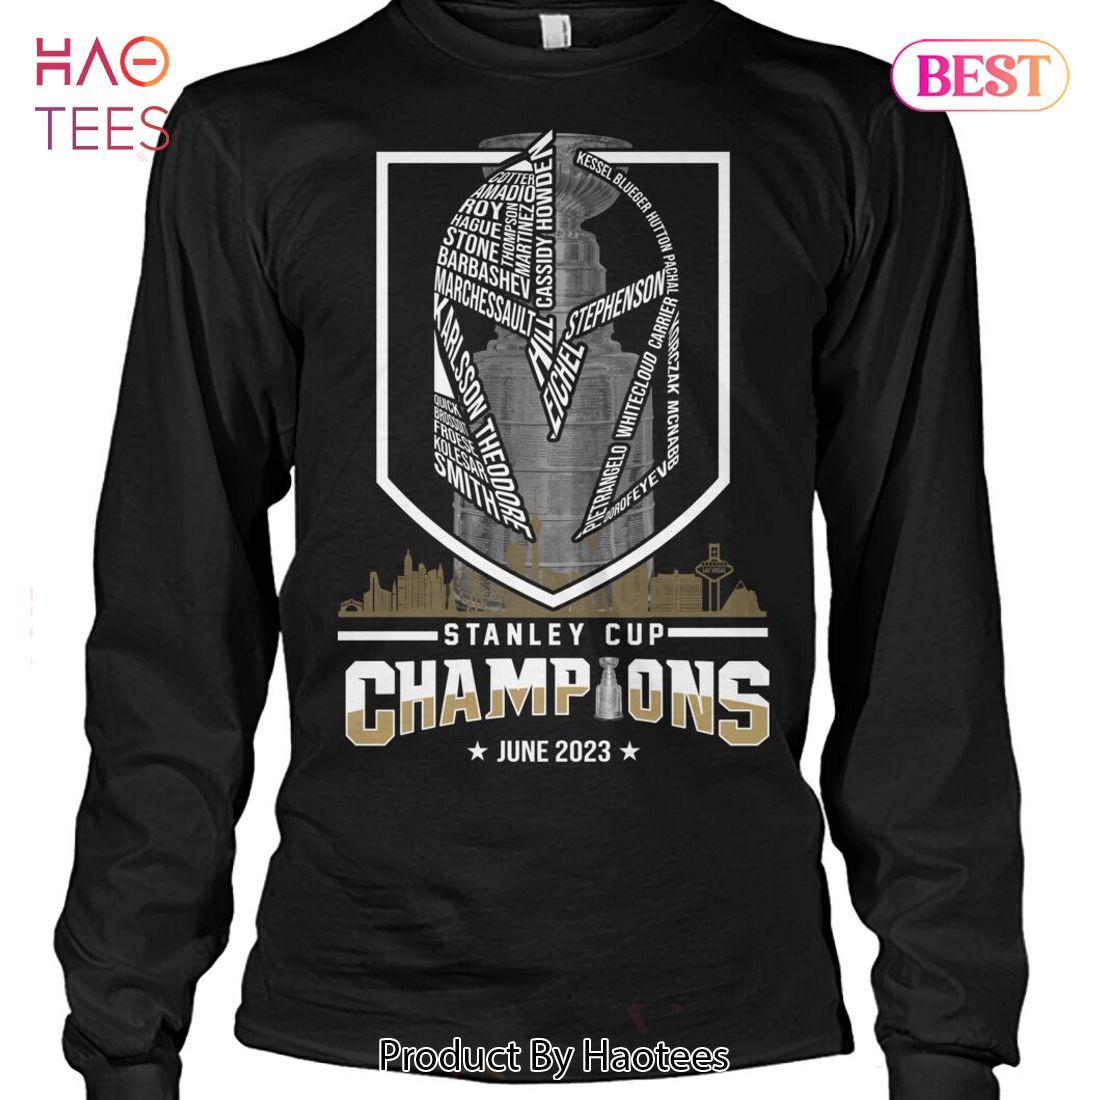 https://images.haotees.com/wp-content/uploads/2023/06/14121059/hot-trend-stanley-cup-champions-2023-vegas-golden-knights-unisex-t-shirt-2-uvCns.jpg